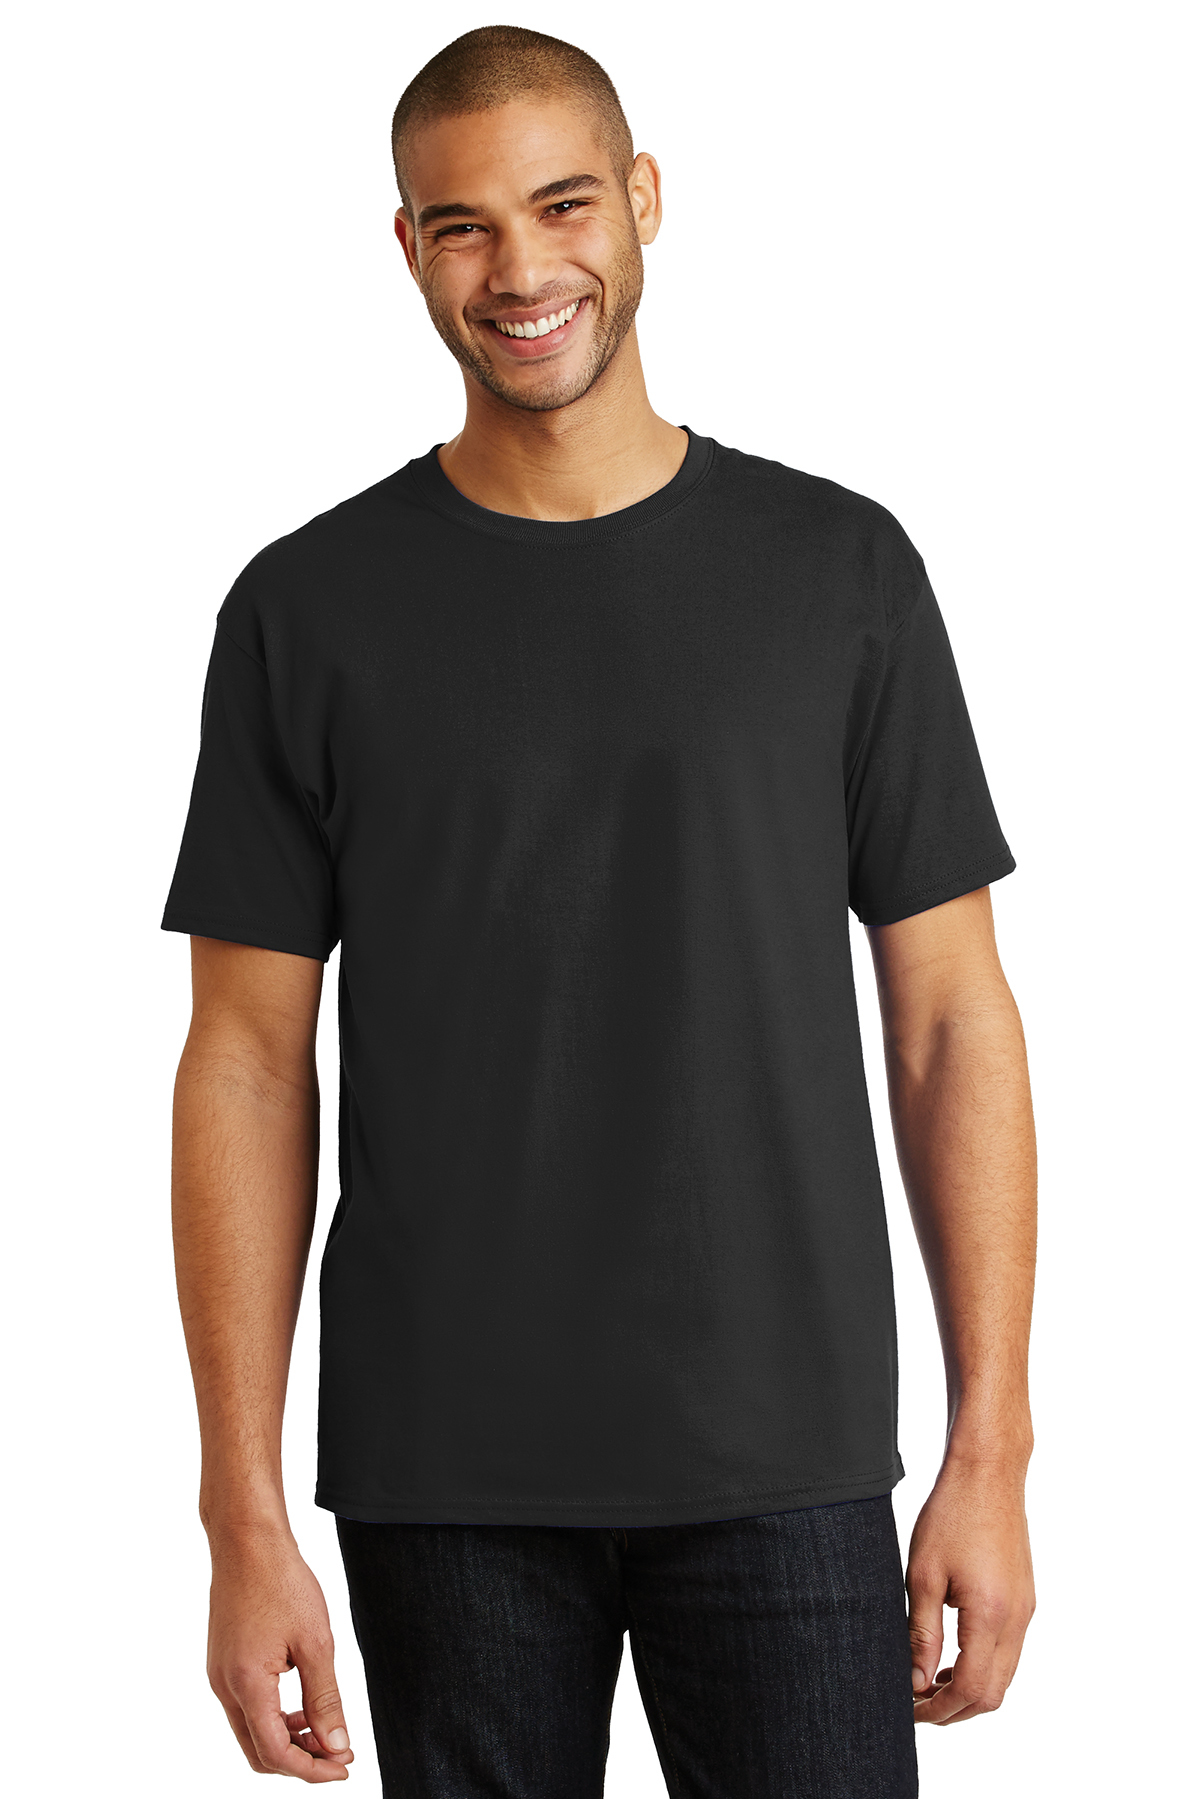 Hanes - Authentic 100% Cotton T-Shirt | Product | Company Casuals